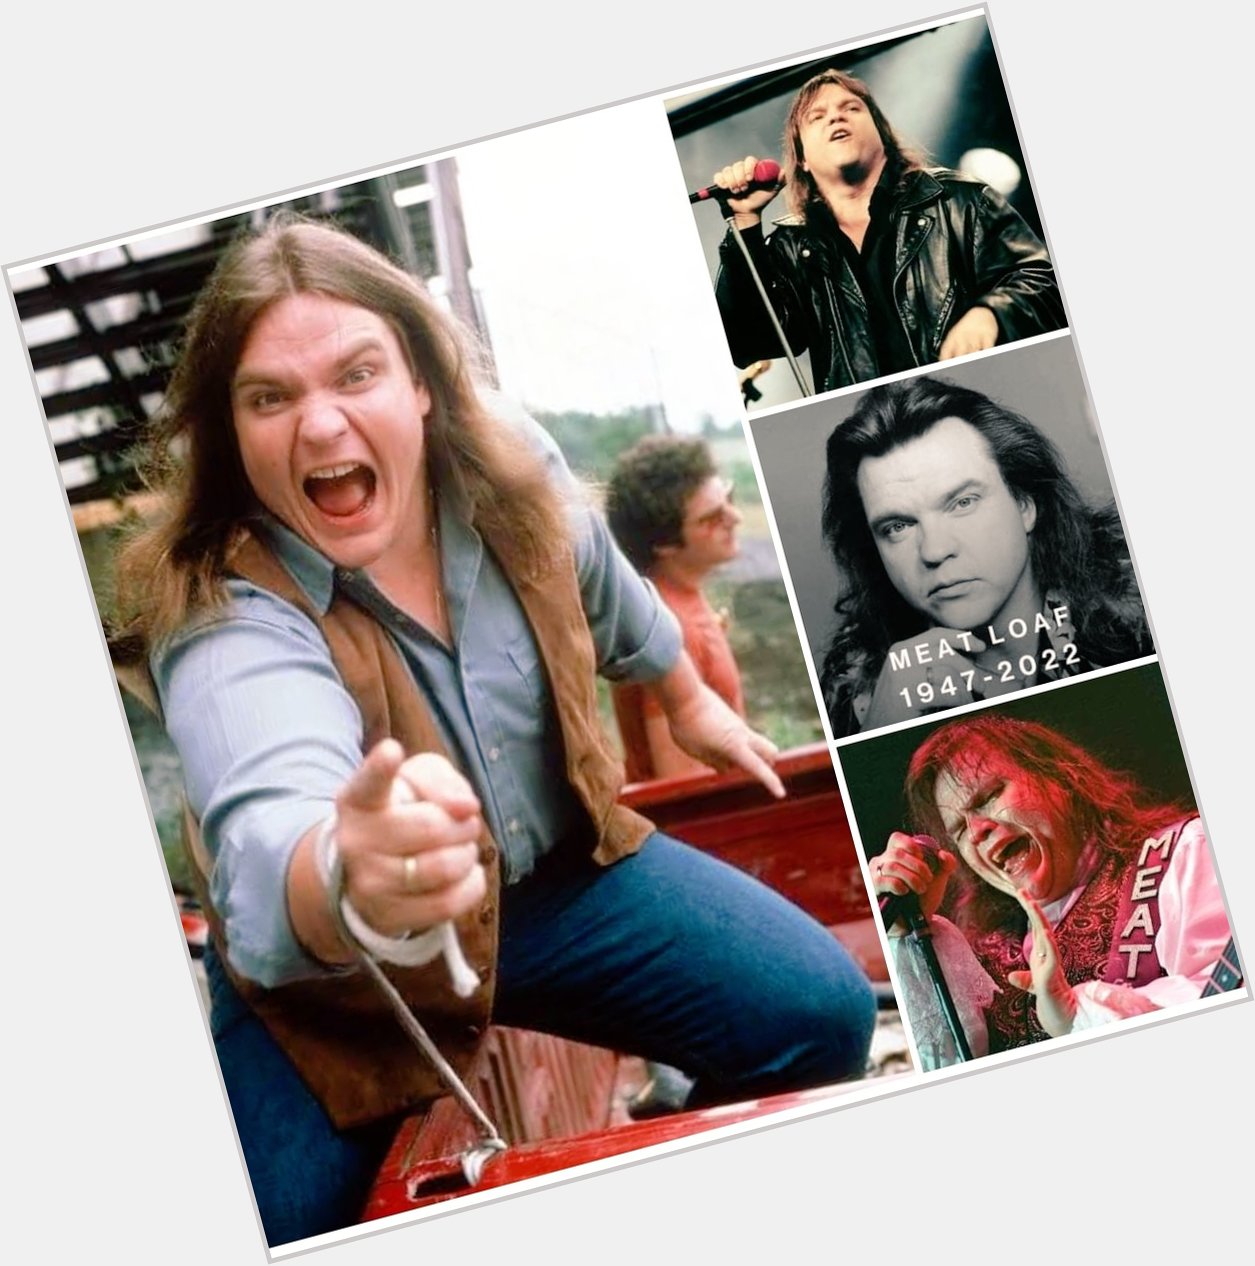 Happy heavenly birthday  MEAT LOAF! (September 27, 1947 
January 20, 2022 